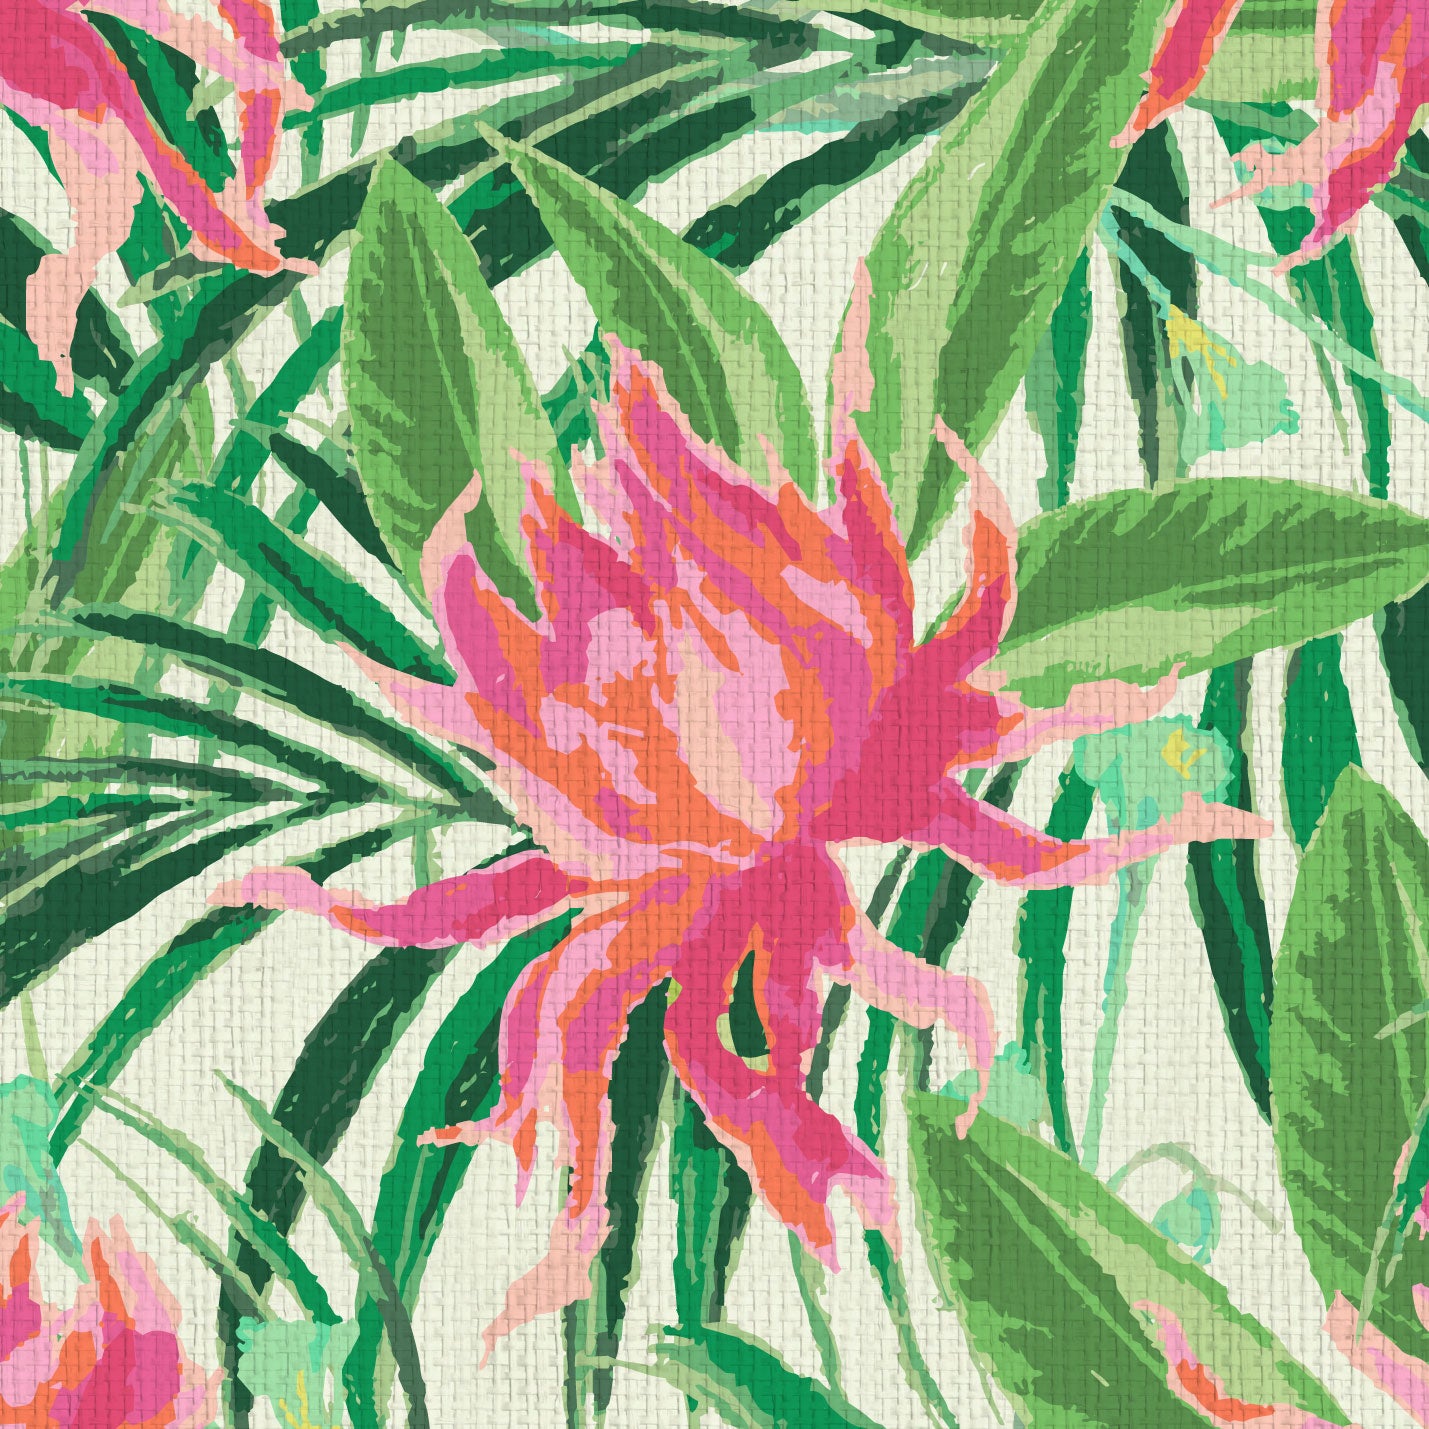 wallpaper with cream based featuring oversized painterly tropical flowers and palm leafs in striking shades of pink and orange and leafs in shades of bright green Natural Textured Eco-Friendly Non-toxic High-quality Sustainable Interior Design Bold Custom Tailor-made Retro chic Tropical Jungle Coastal preppy Garden Seaside Coastal Seashore Waterfront Vacation home styling Retreat Relaxed beach vibes Beach cottage Shoreline Oceanfront botanical palm leaf paperweave paper weave